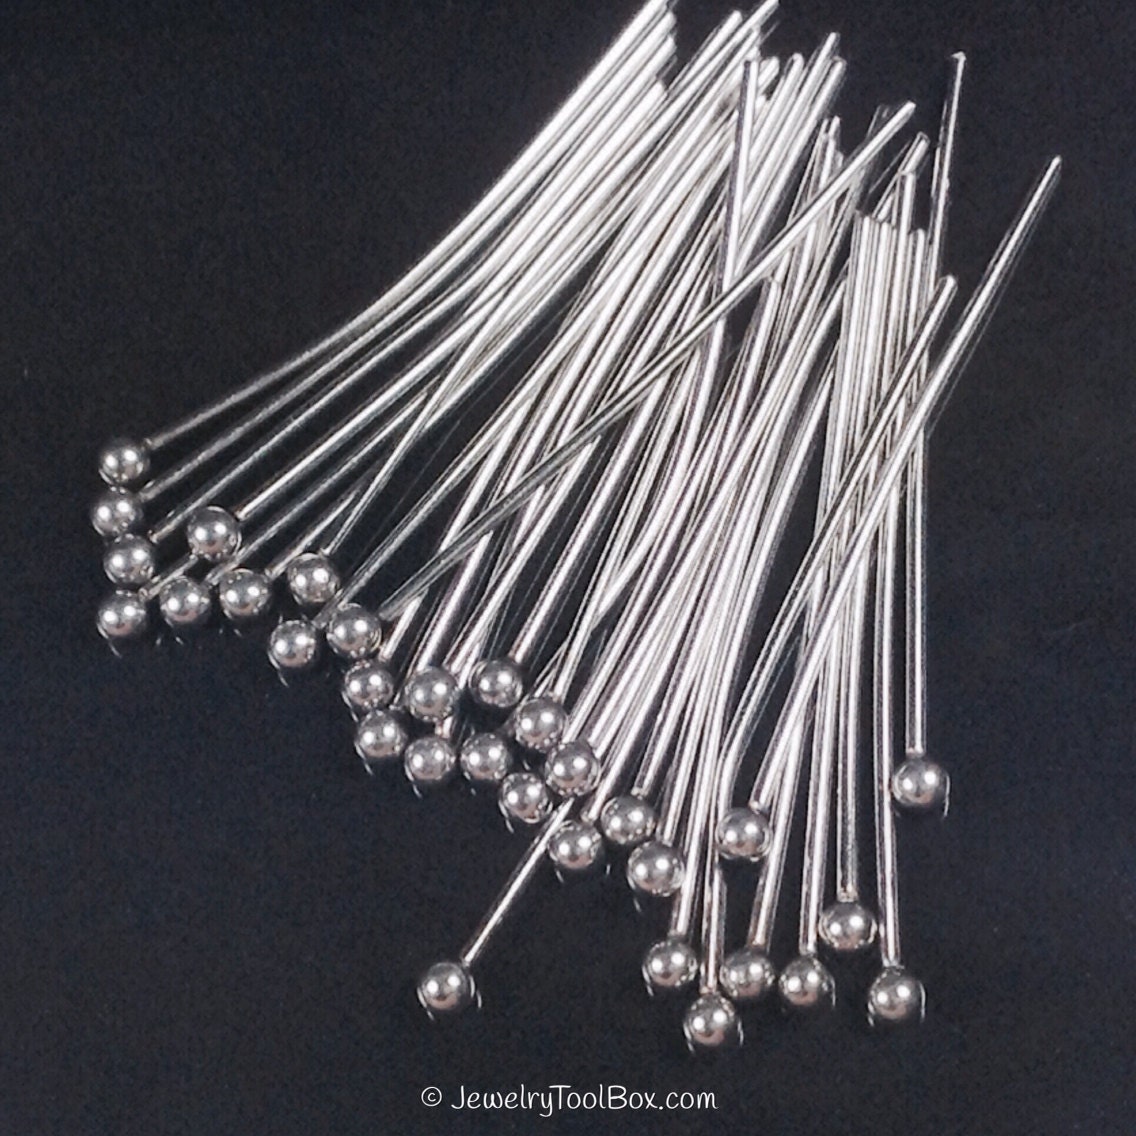 Stainless Steel Ballpins Ball End Headpins 20mm 3/4 inch